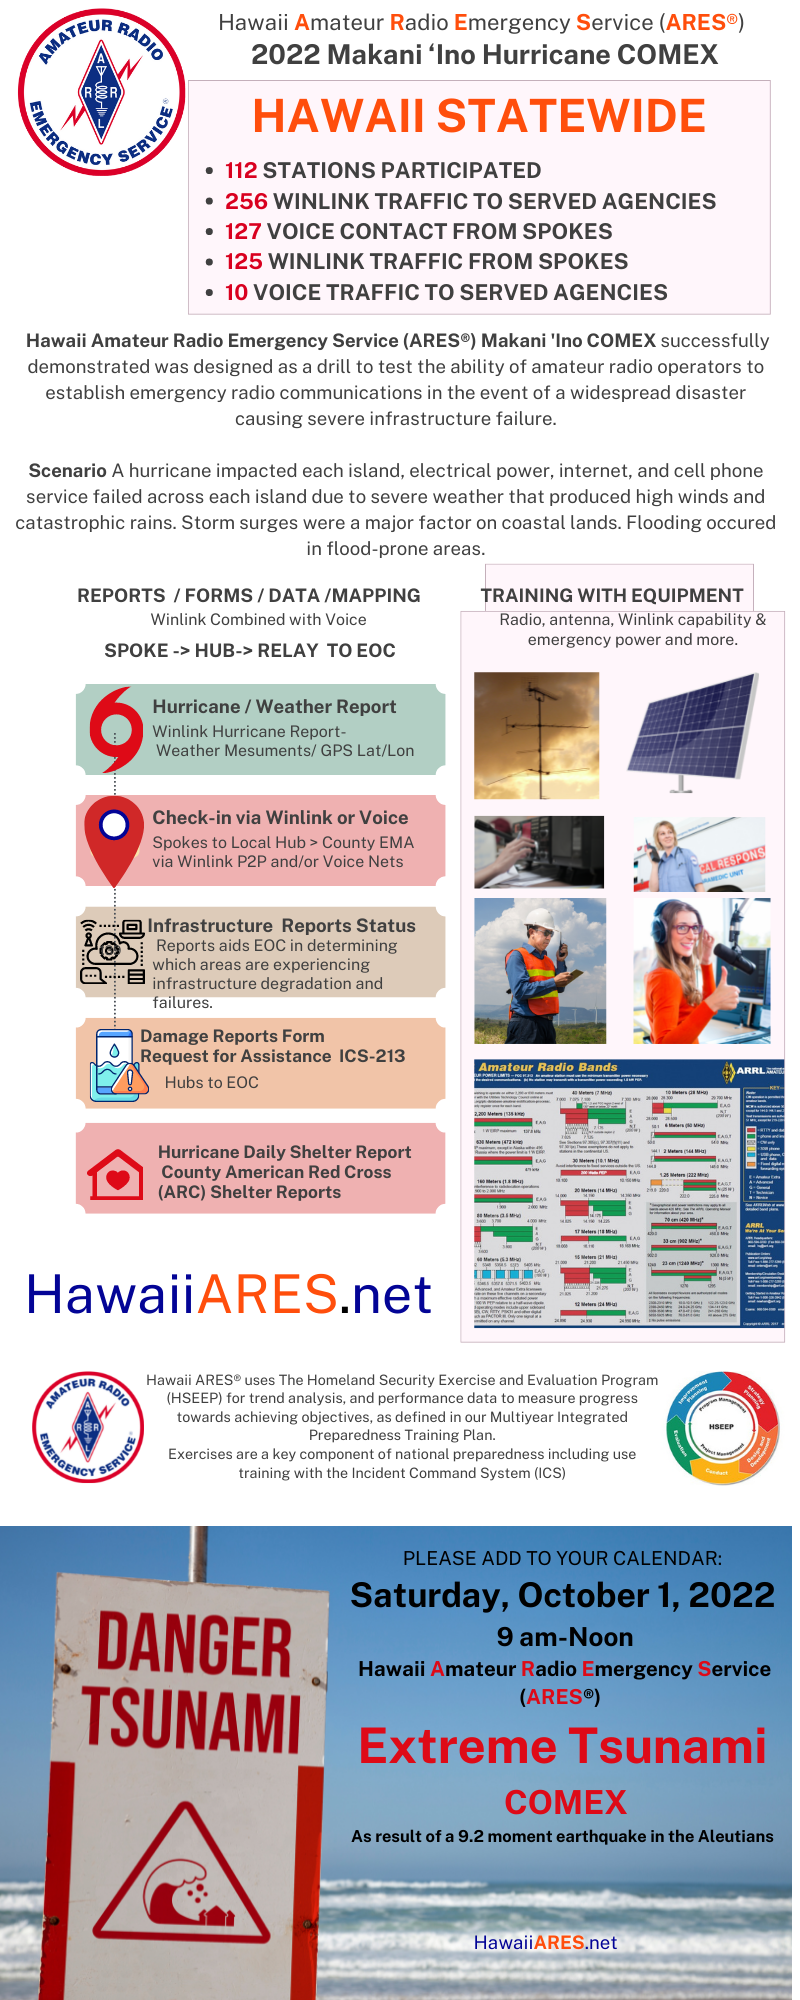 About Hawaii ARES